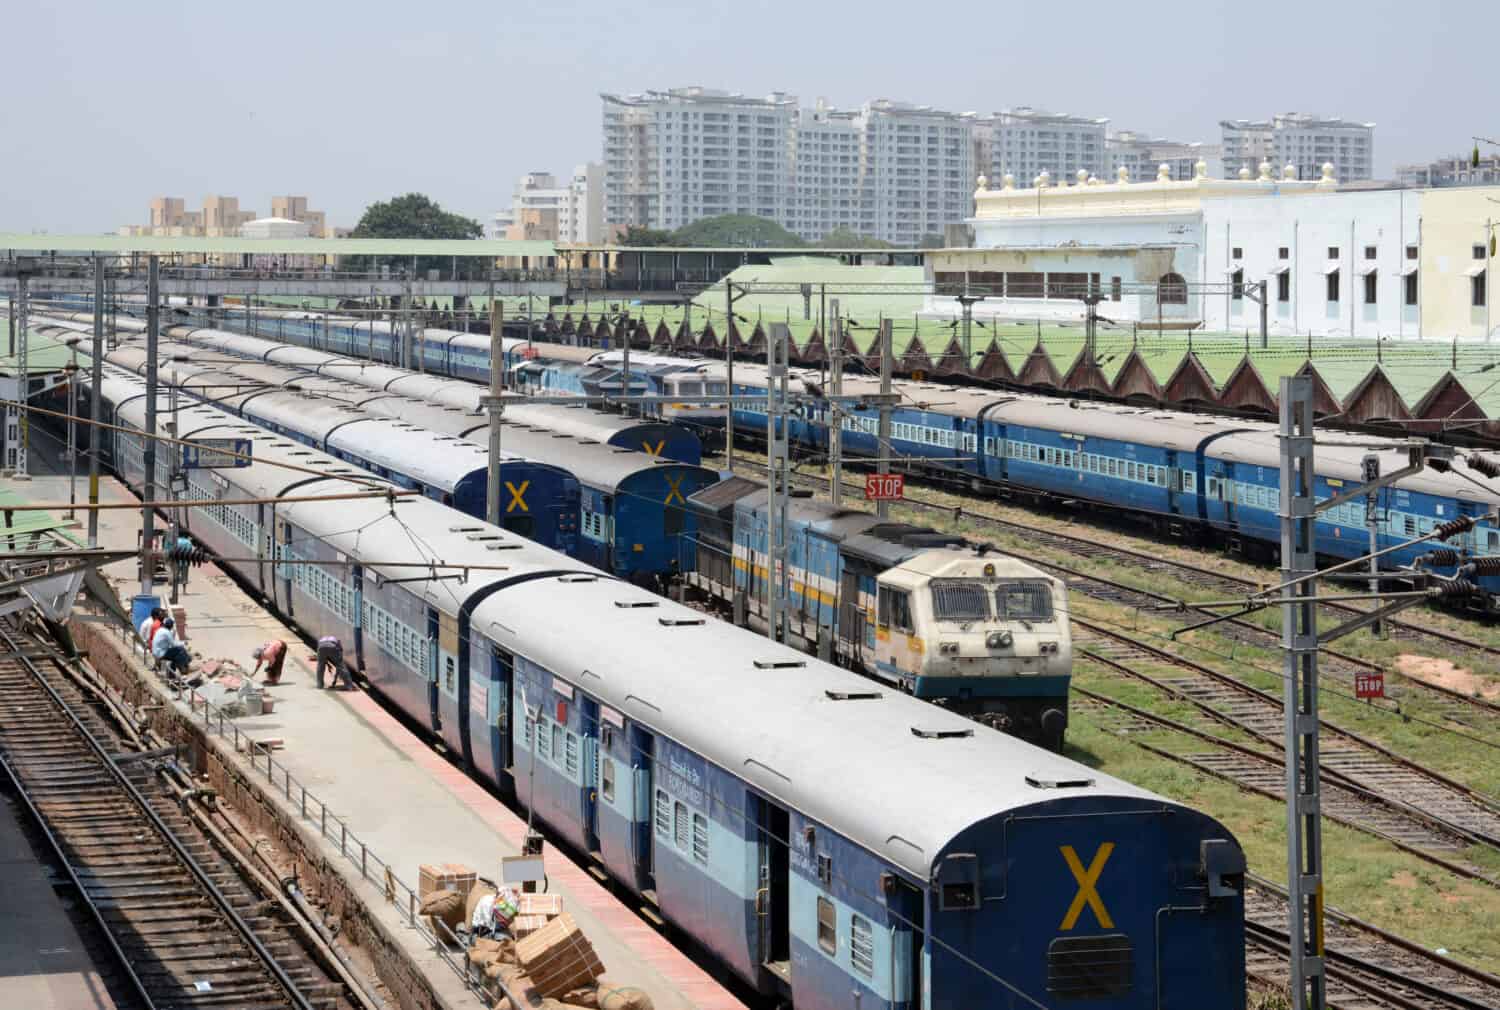 Trains parked at railway station in India.